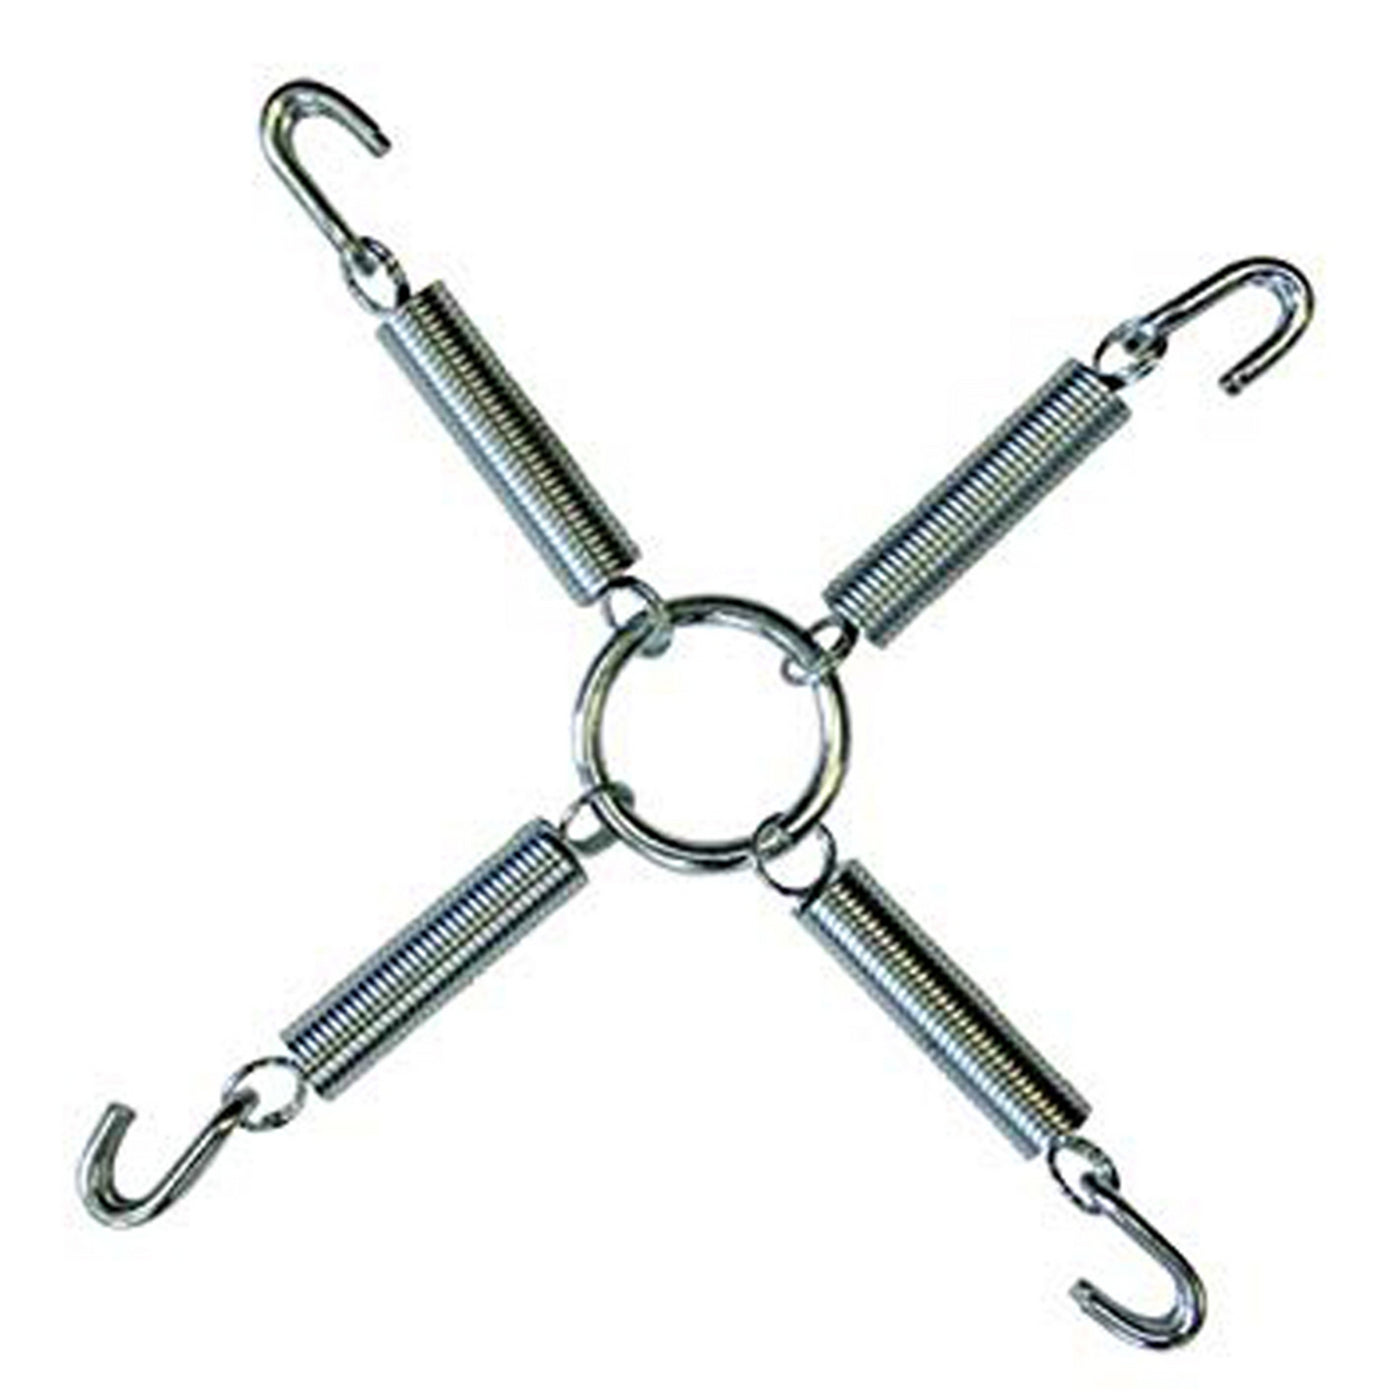 TIRE CHAIN ADJUSTER 10" OR LARGER#mpn_0270I